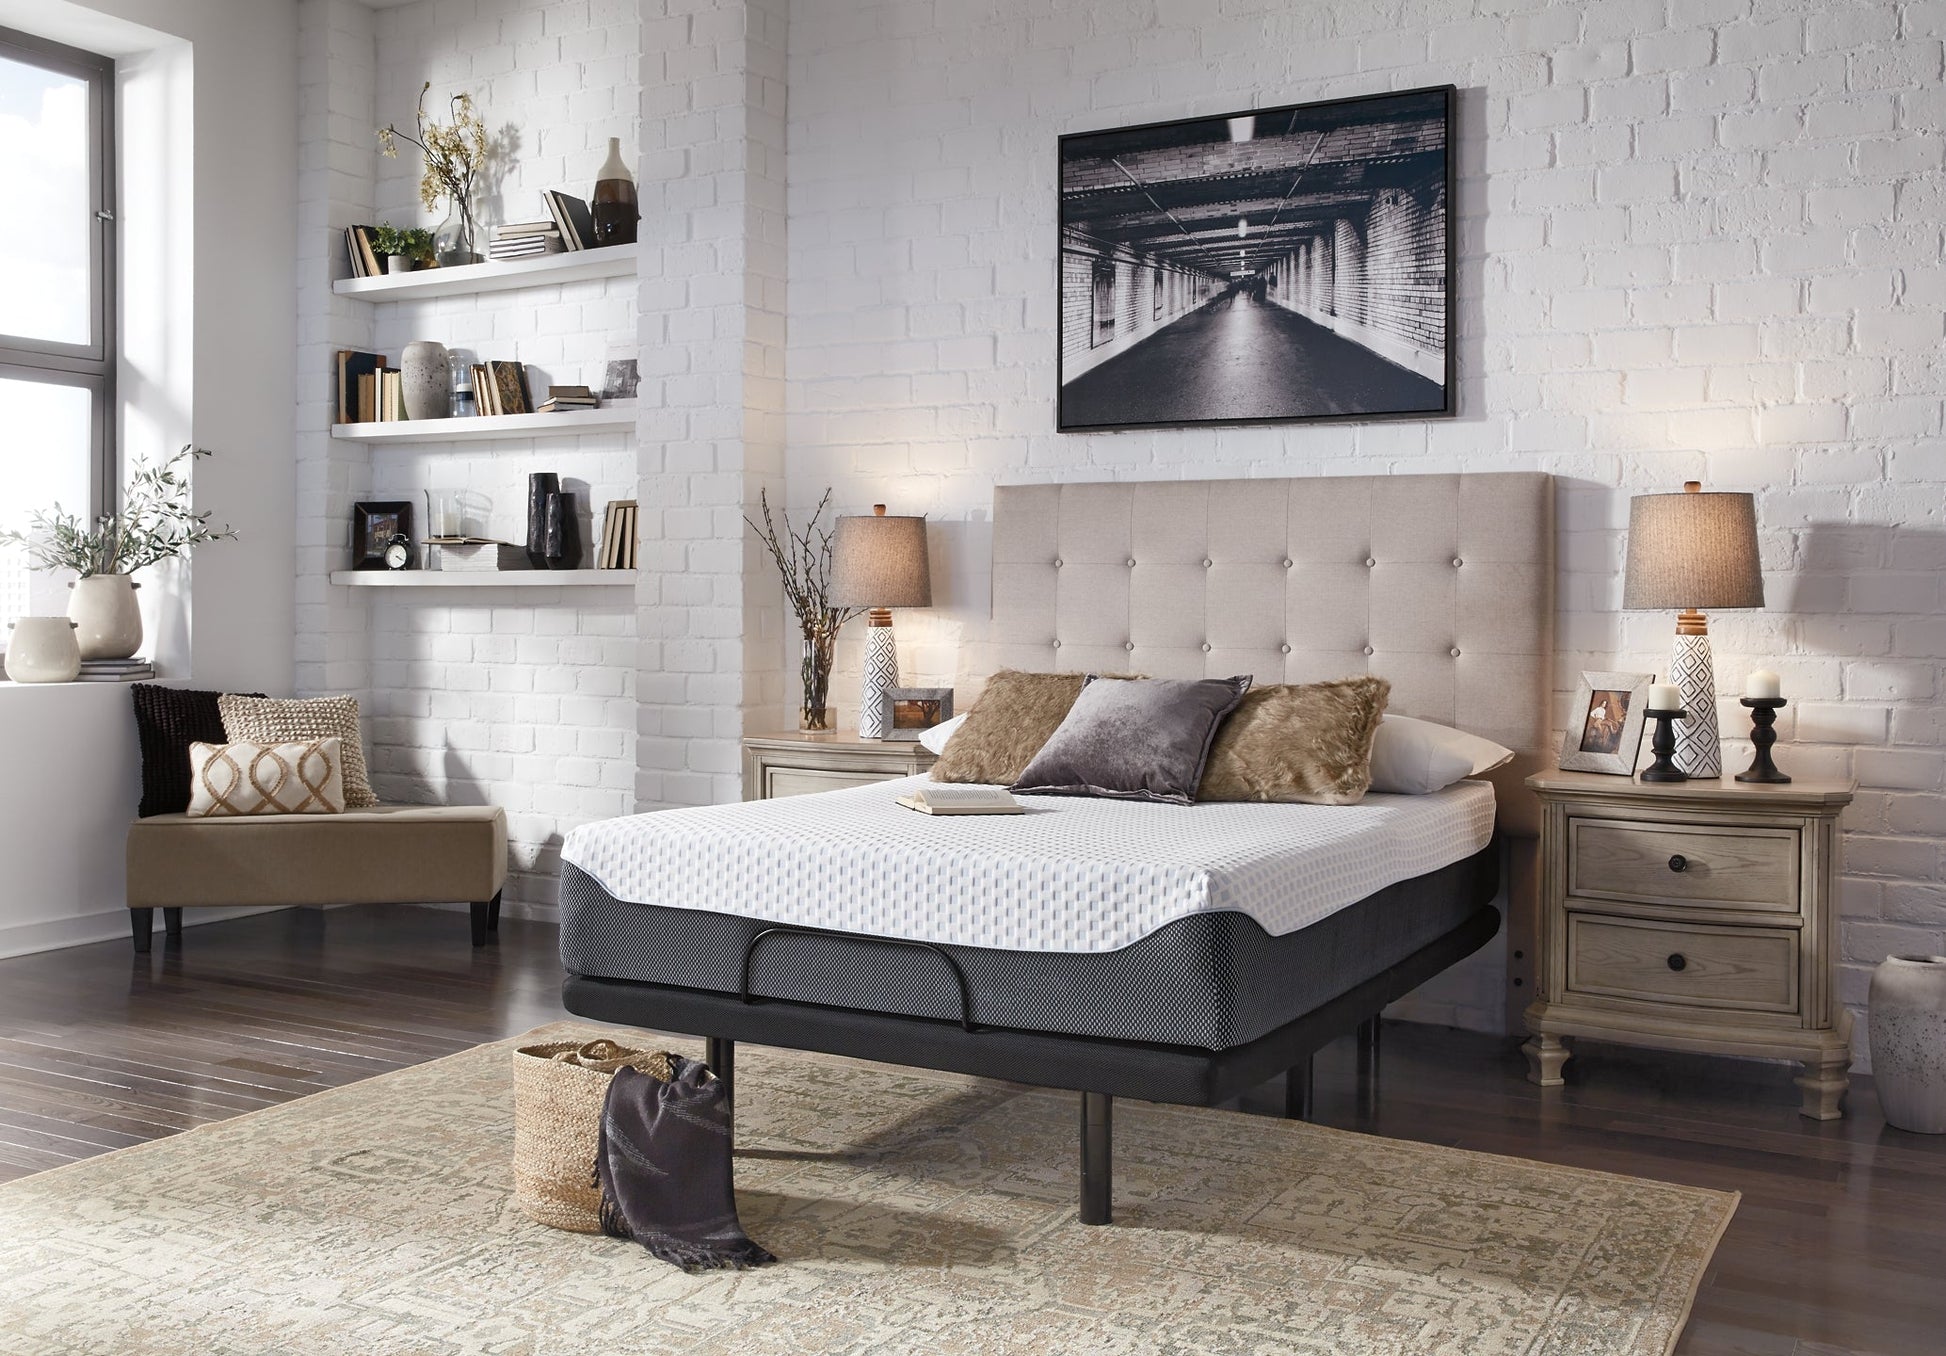 12 Inch Chime Elite Mattress with Adjustable Base Rent Wise Rent To Own Jacksonville, Florida